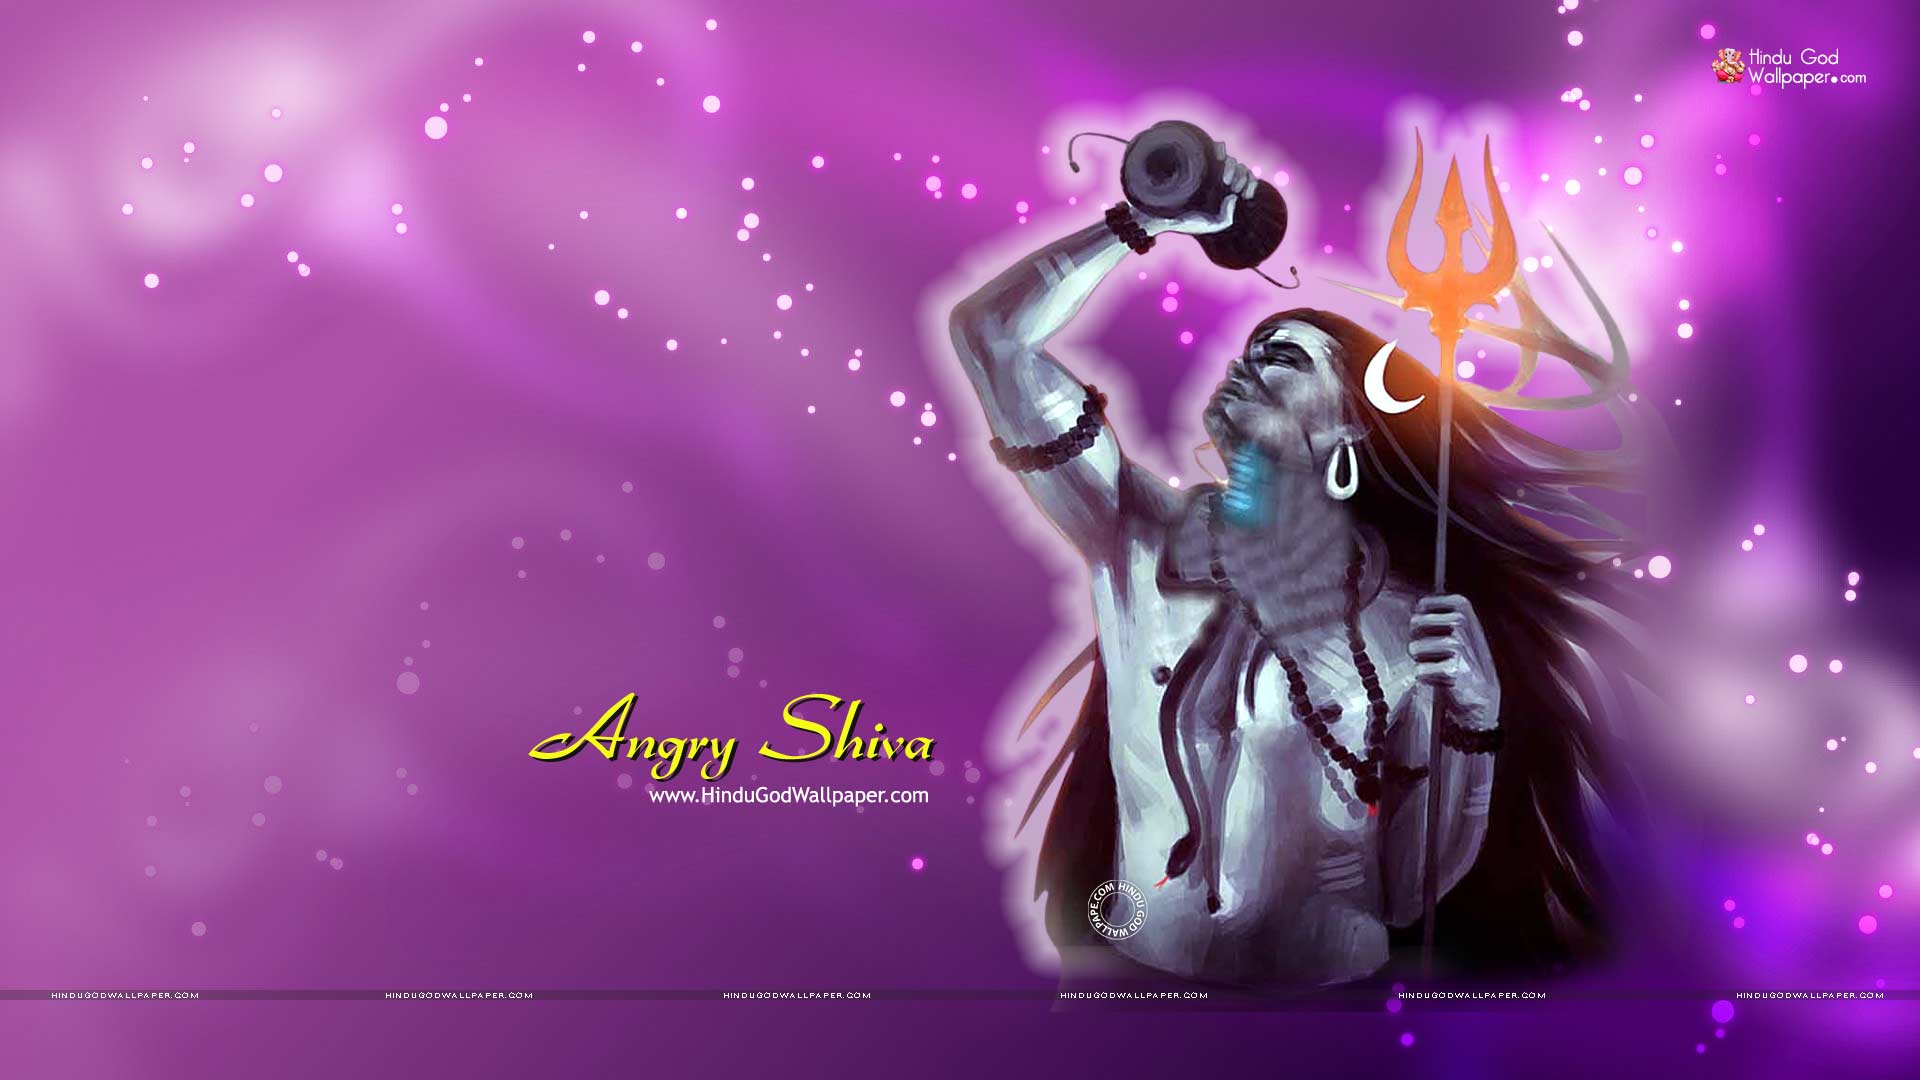 angry lord shiva wallpapers wallpaper cave angry lord shiva wallpapers wallpaper